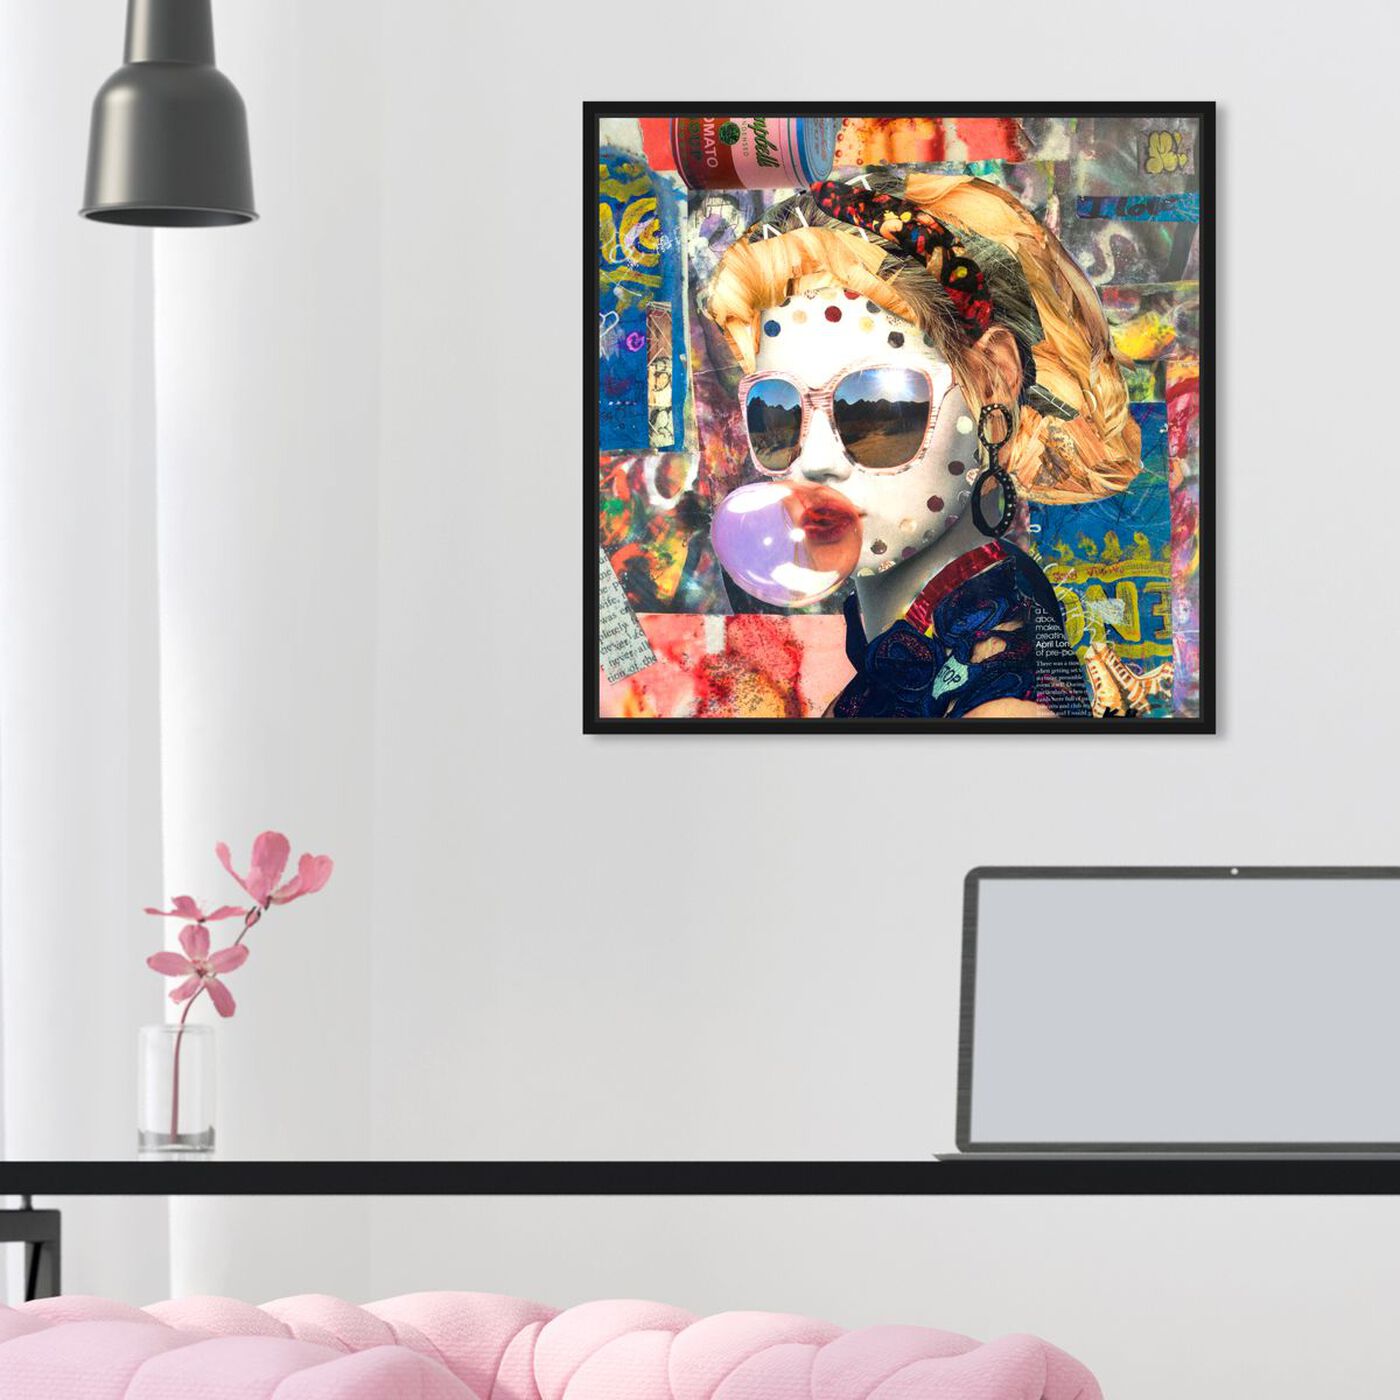 Hanging view of Katy Hirschfeld - Bubblegum featuring fashion and glam and portraits art.